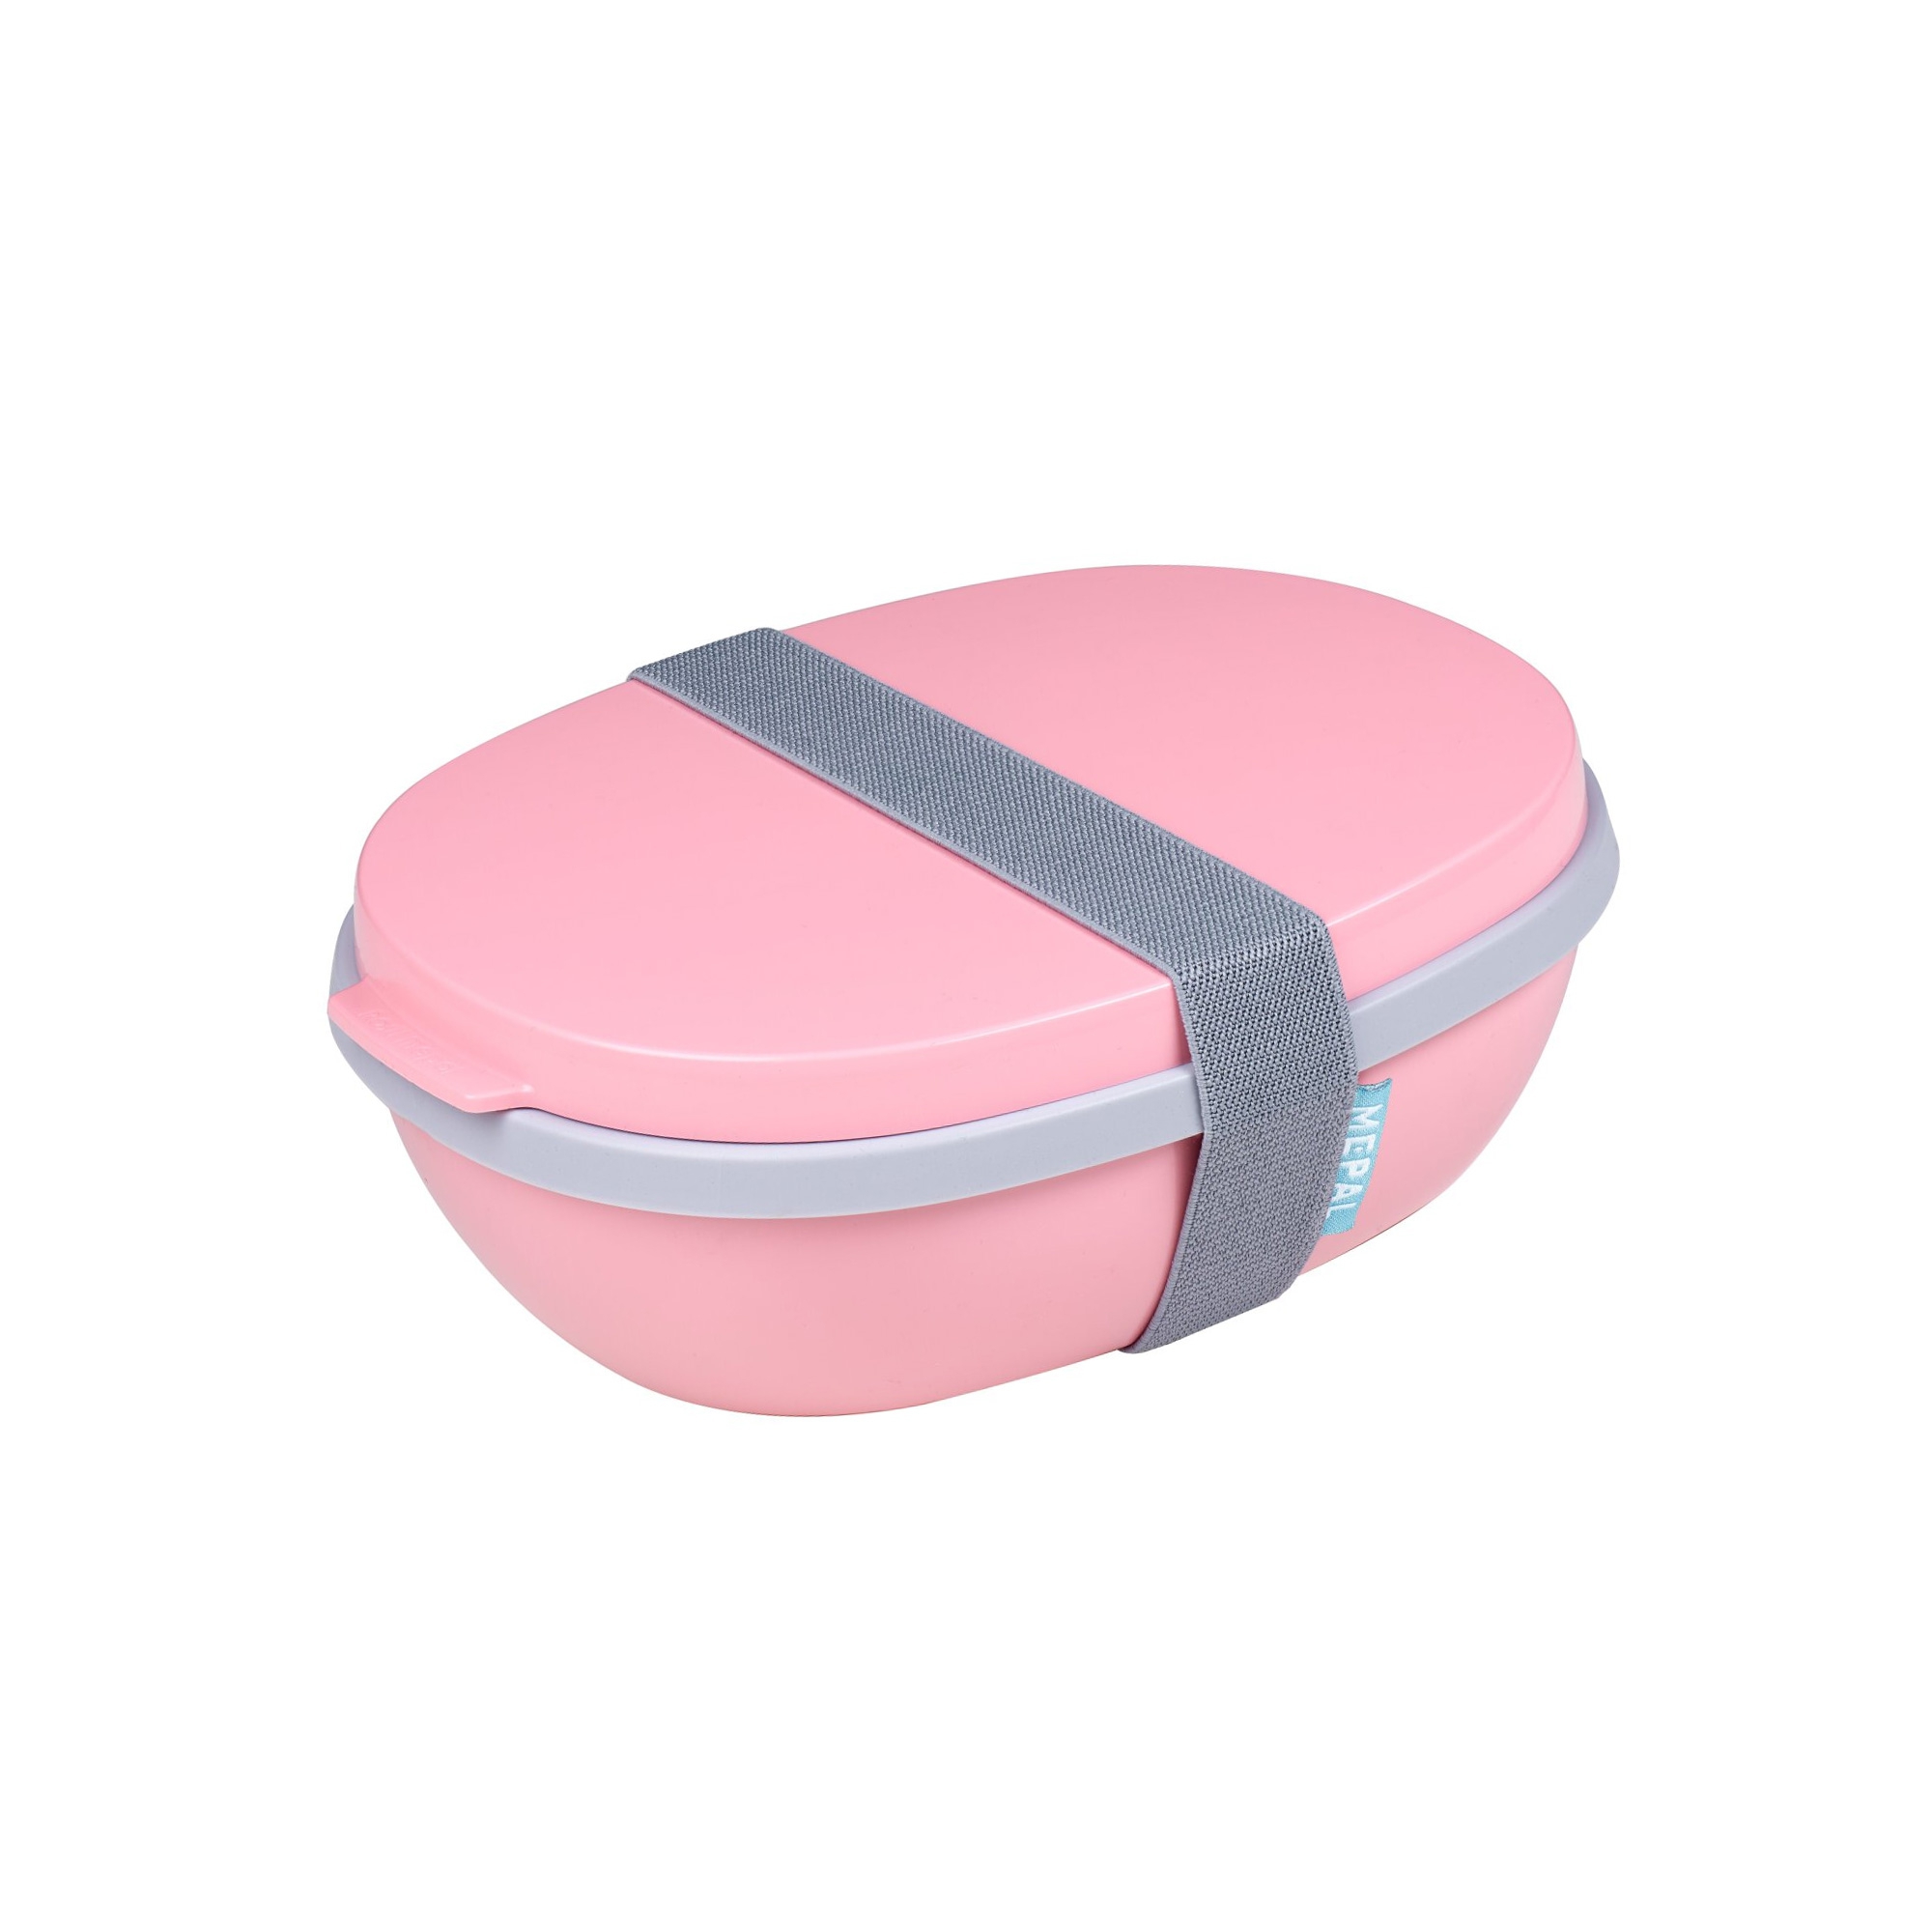 Mepal - Ellipse duo Lunchbox - different colors